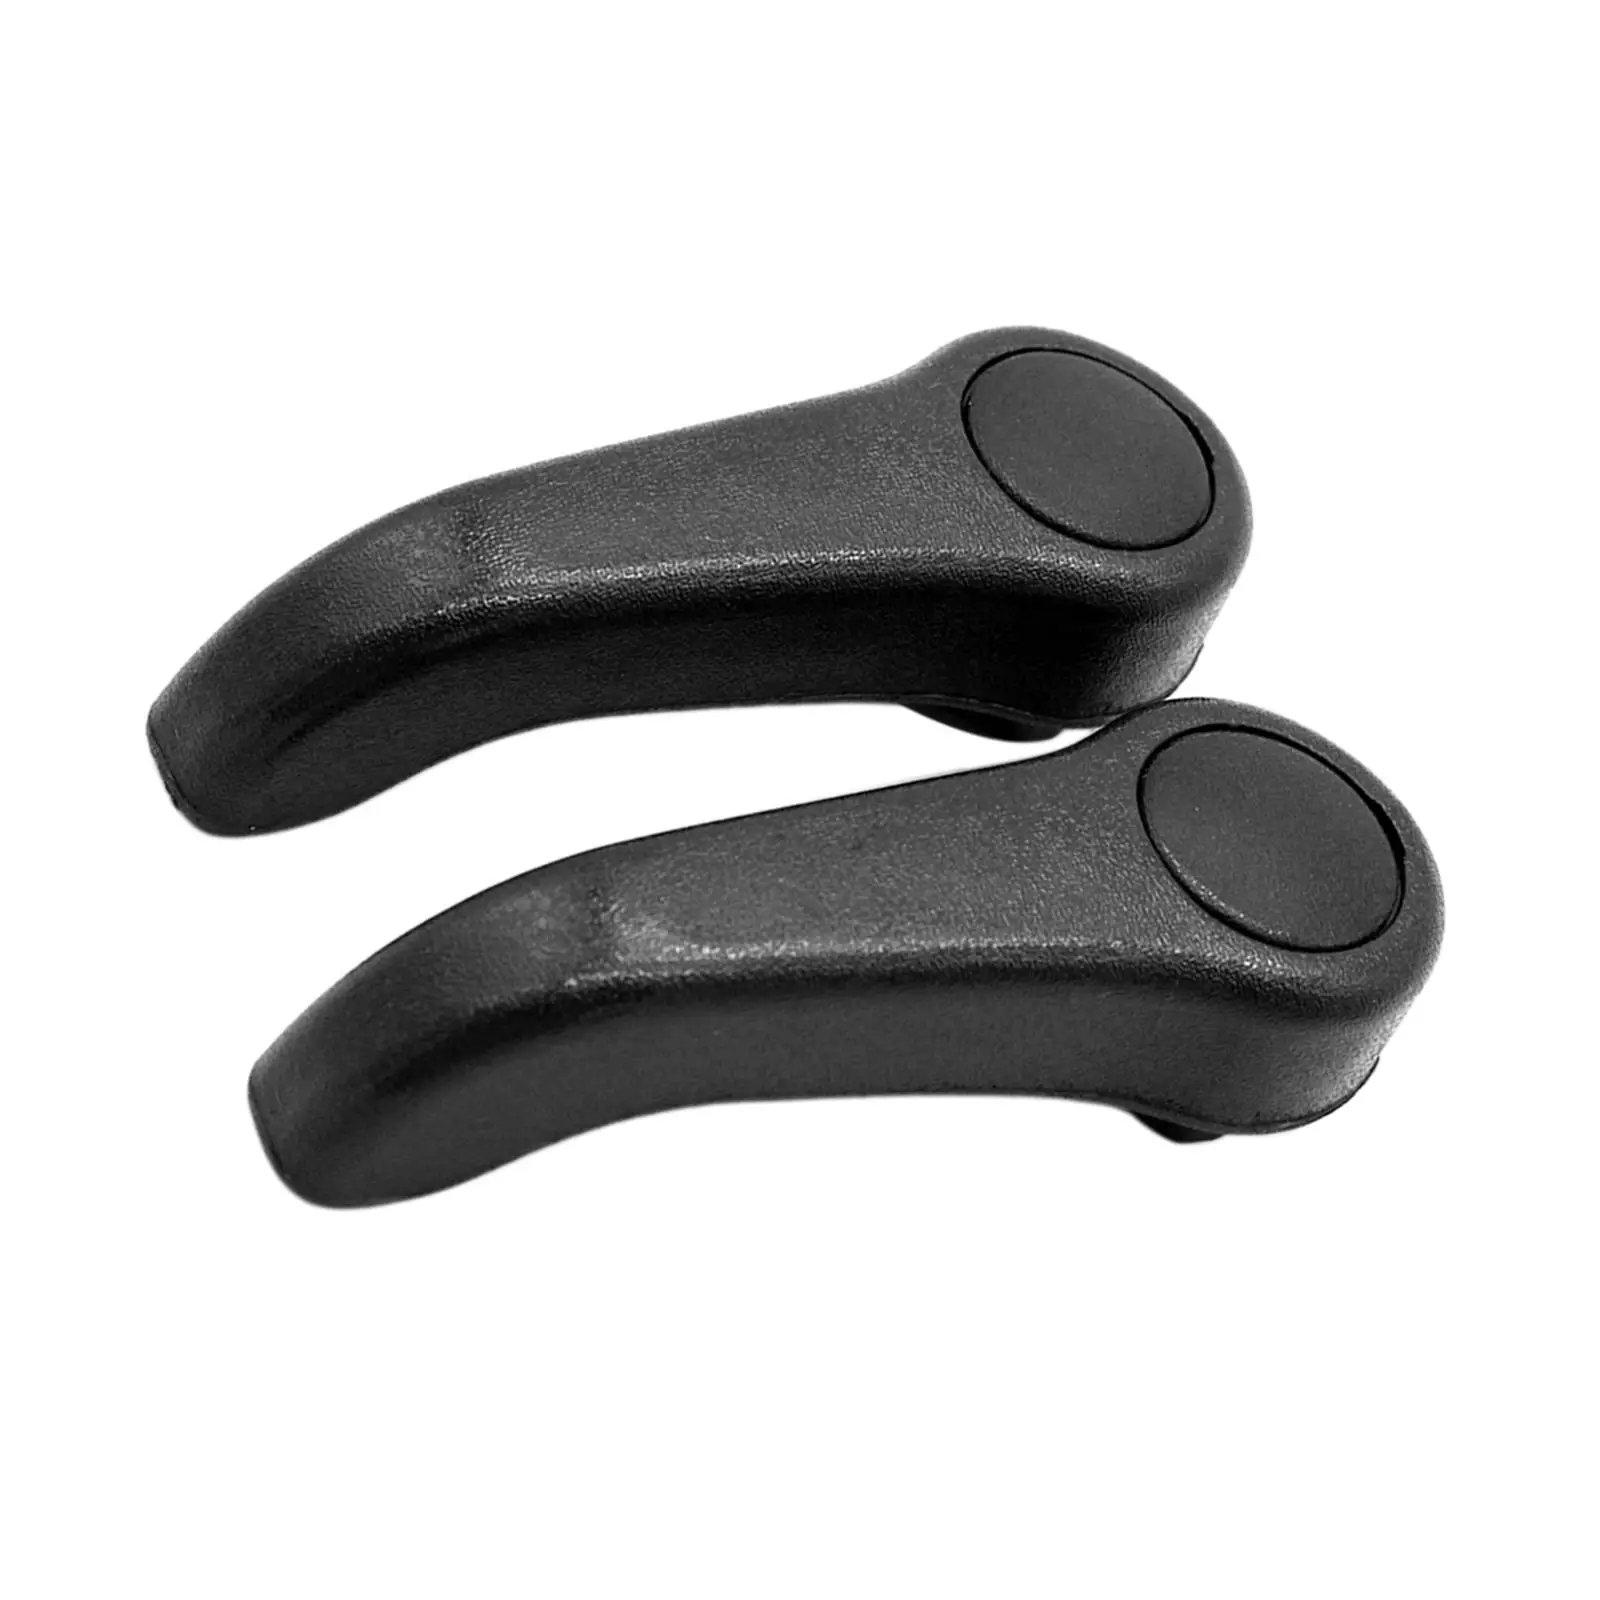 Handle Adjustment Grip, Durable Parts Accessory Portable Replaces Practical car Adjuster Lever for MK2 7701205708